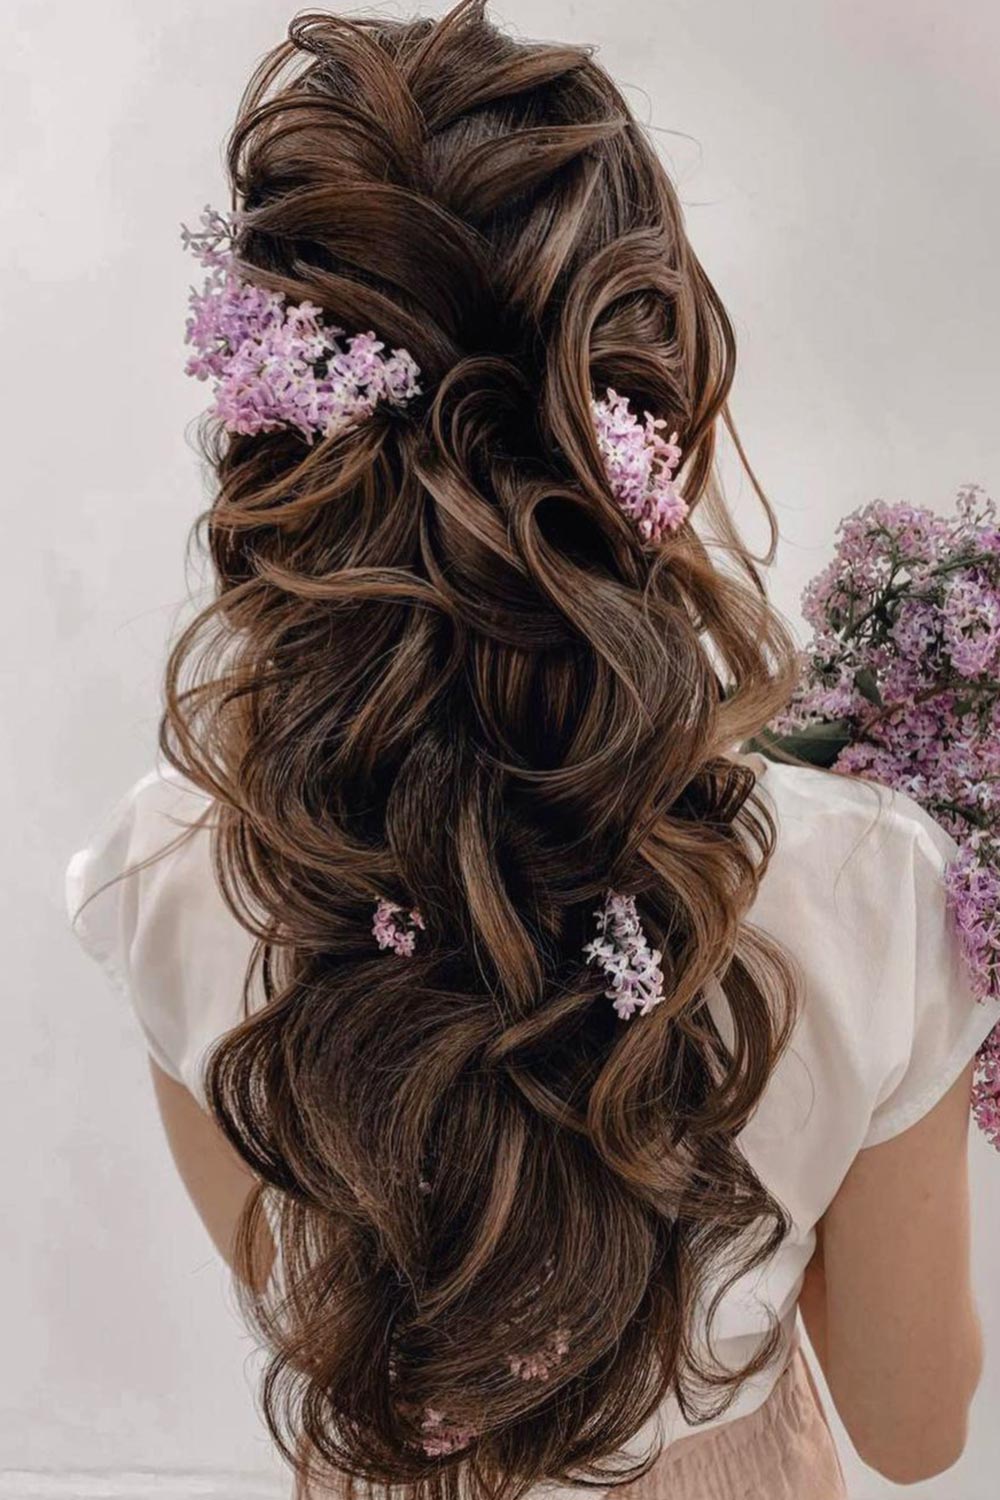 Structured Curls wit Flowers